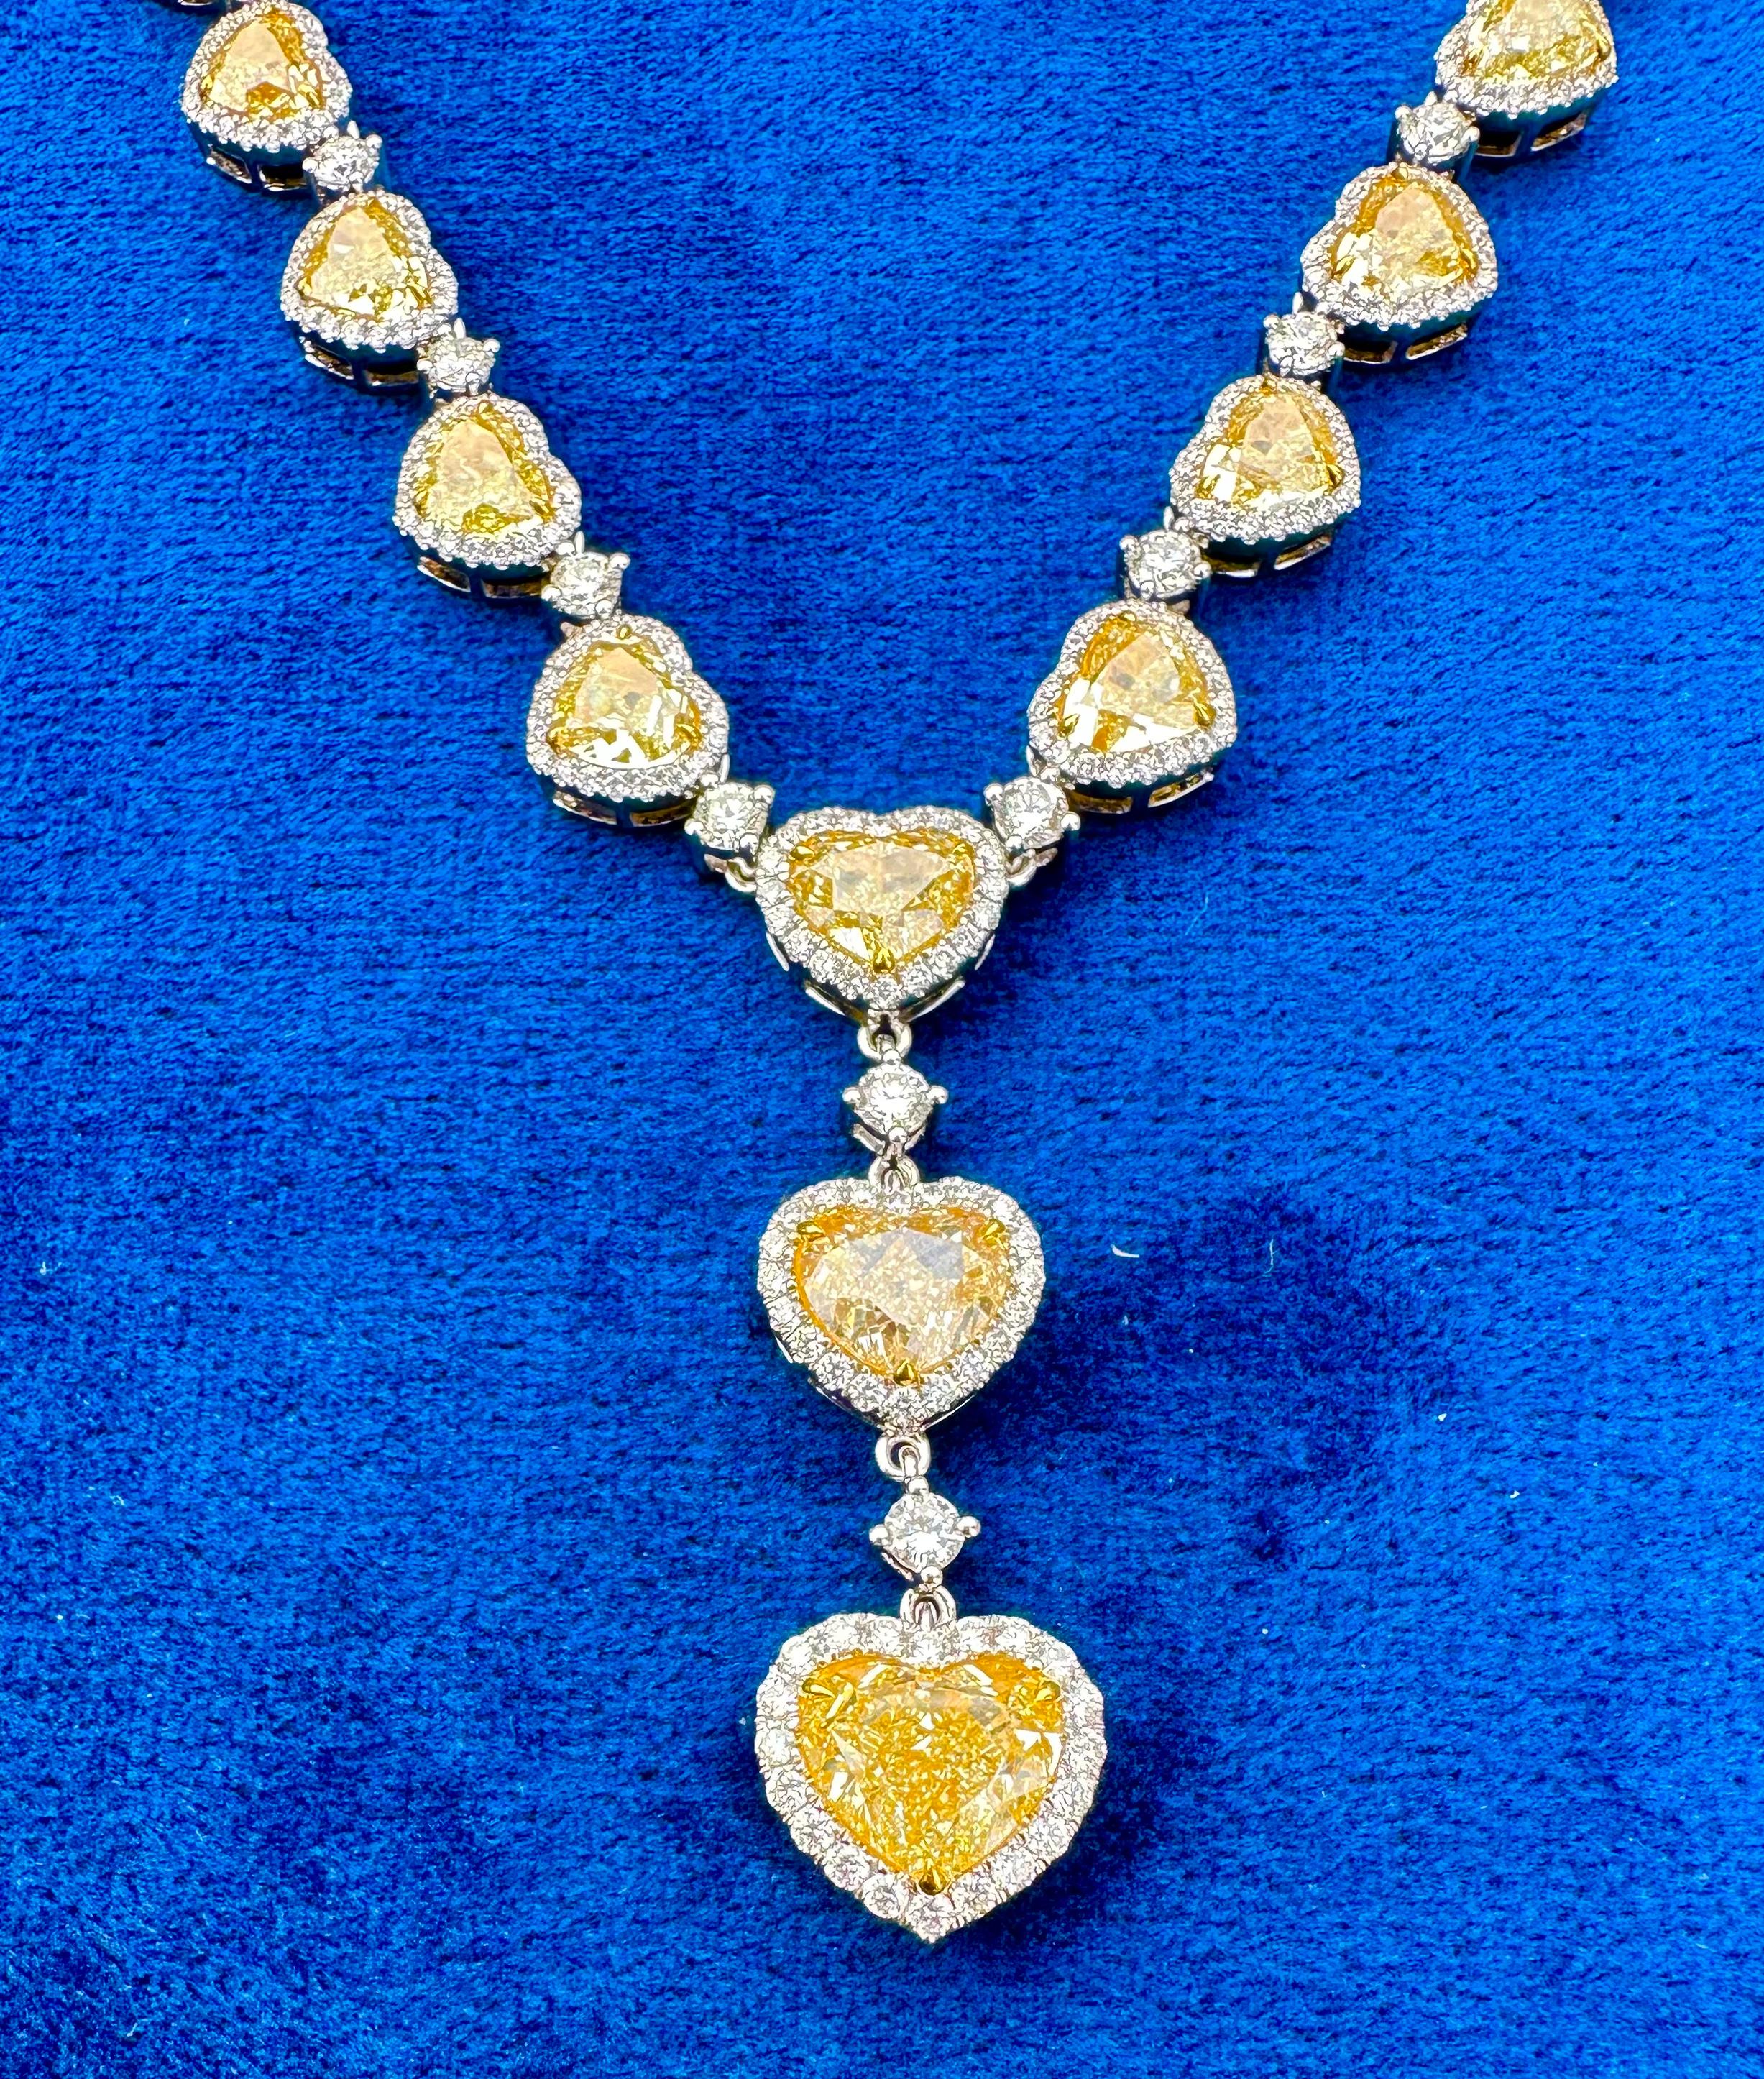 Captivating, approximately 43.48 carat natural yellow heart shaped diamond 18 karat white and yellow gold drop front lariat style necklace with a trilogy of three large heart shaped diamonds suspended from the middle, features a total of 29